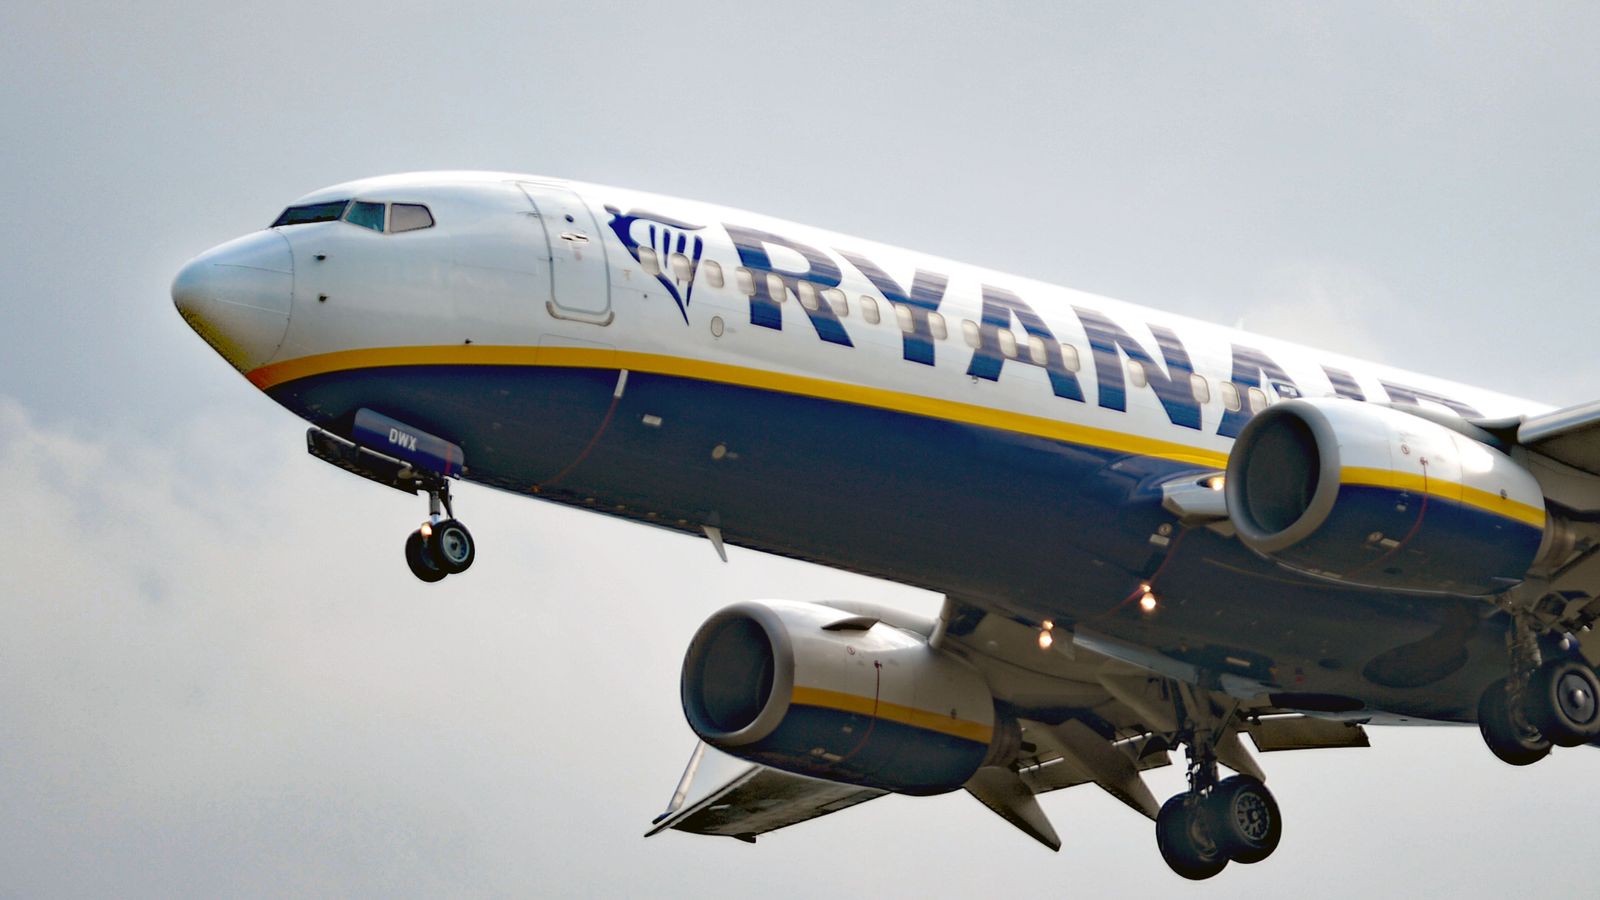 Ryanair cuts profit forecast after airline removed from booking sites